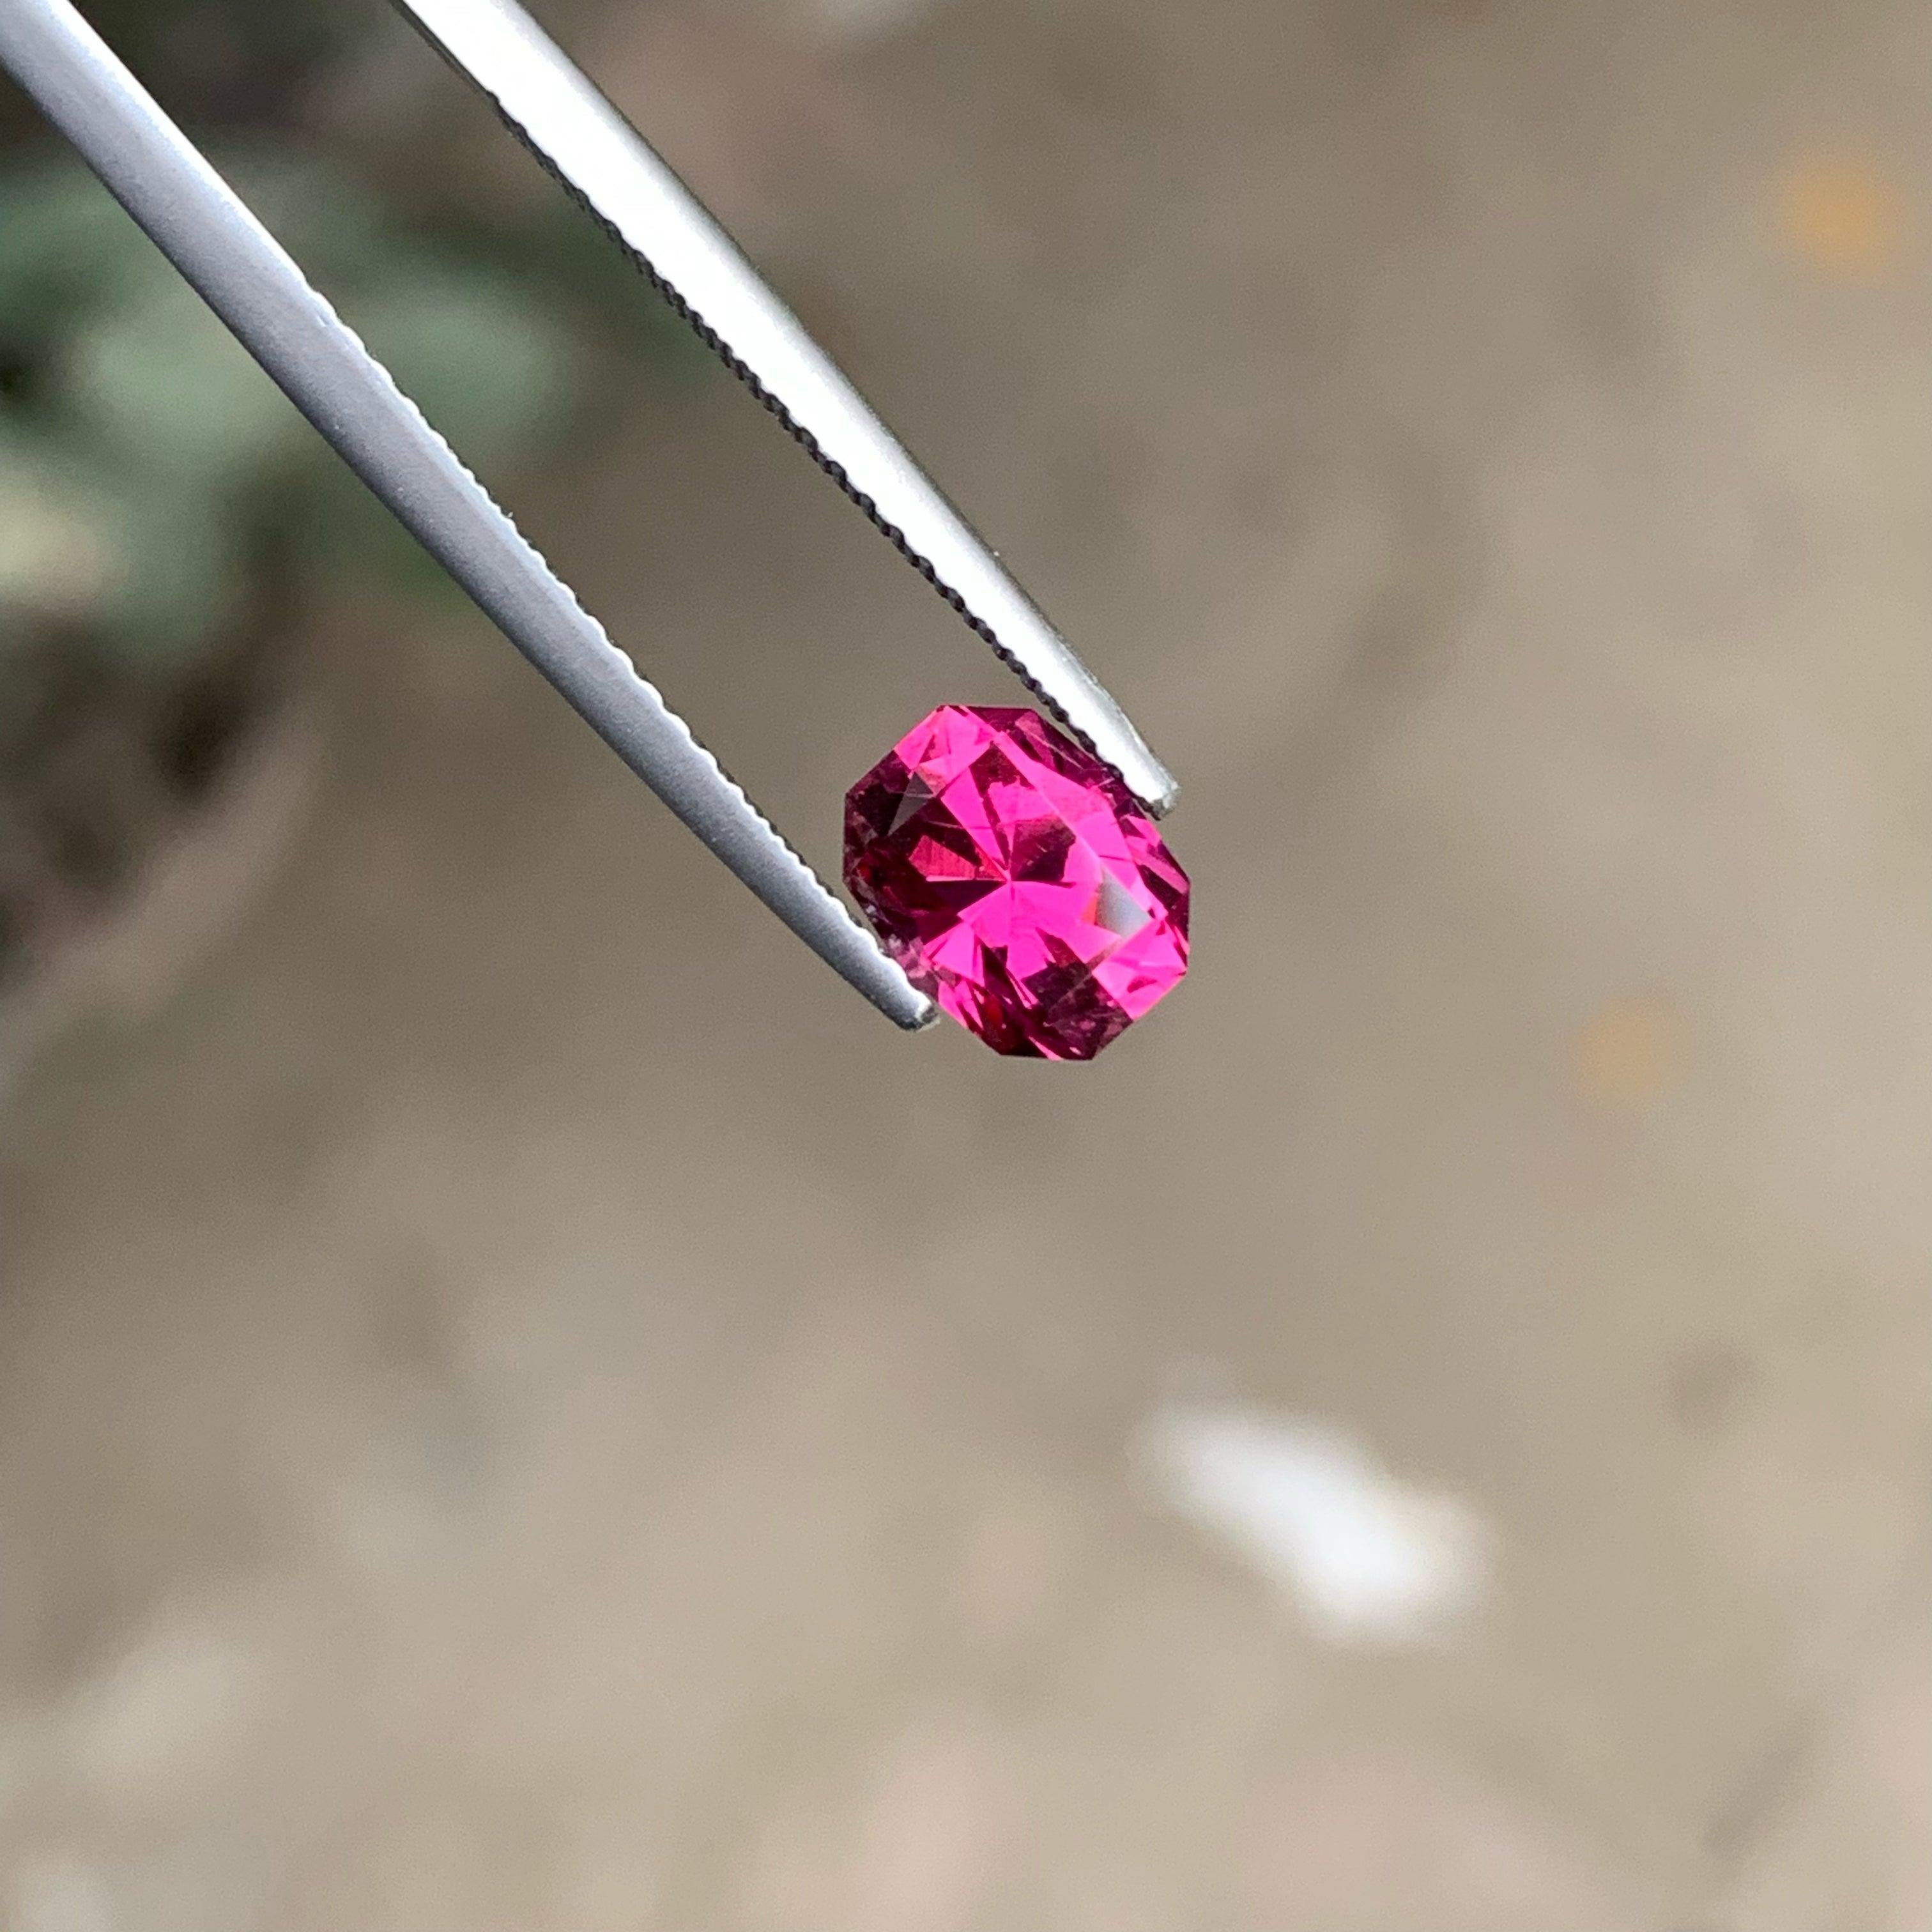 Fantastic Hot Pink Natural Garnet of 1.55 carats from Africa has a wonderful cut in a Custom shape, incredible Pink color, Great brilliance. This gem is VVS Clarity.

Product Information:
GEMSTONE NAME: Fantastic Hot Pink Natural Garnet
WEIGHT:	1.55